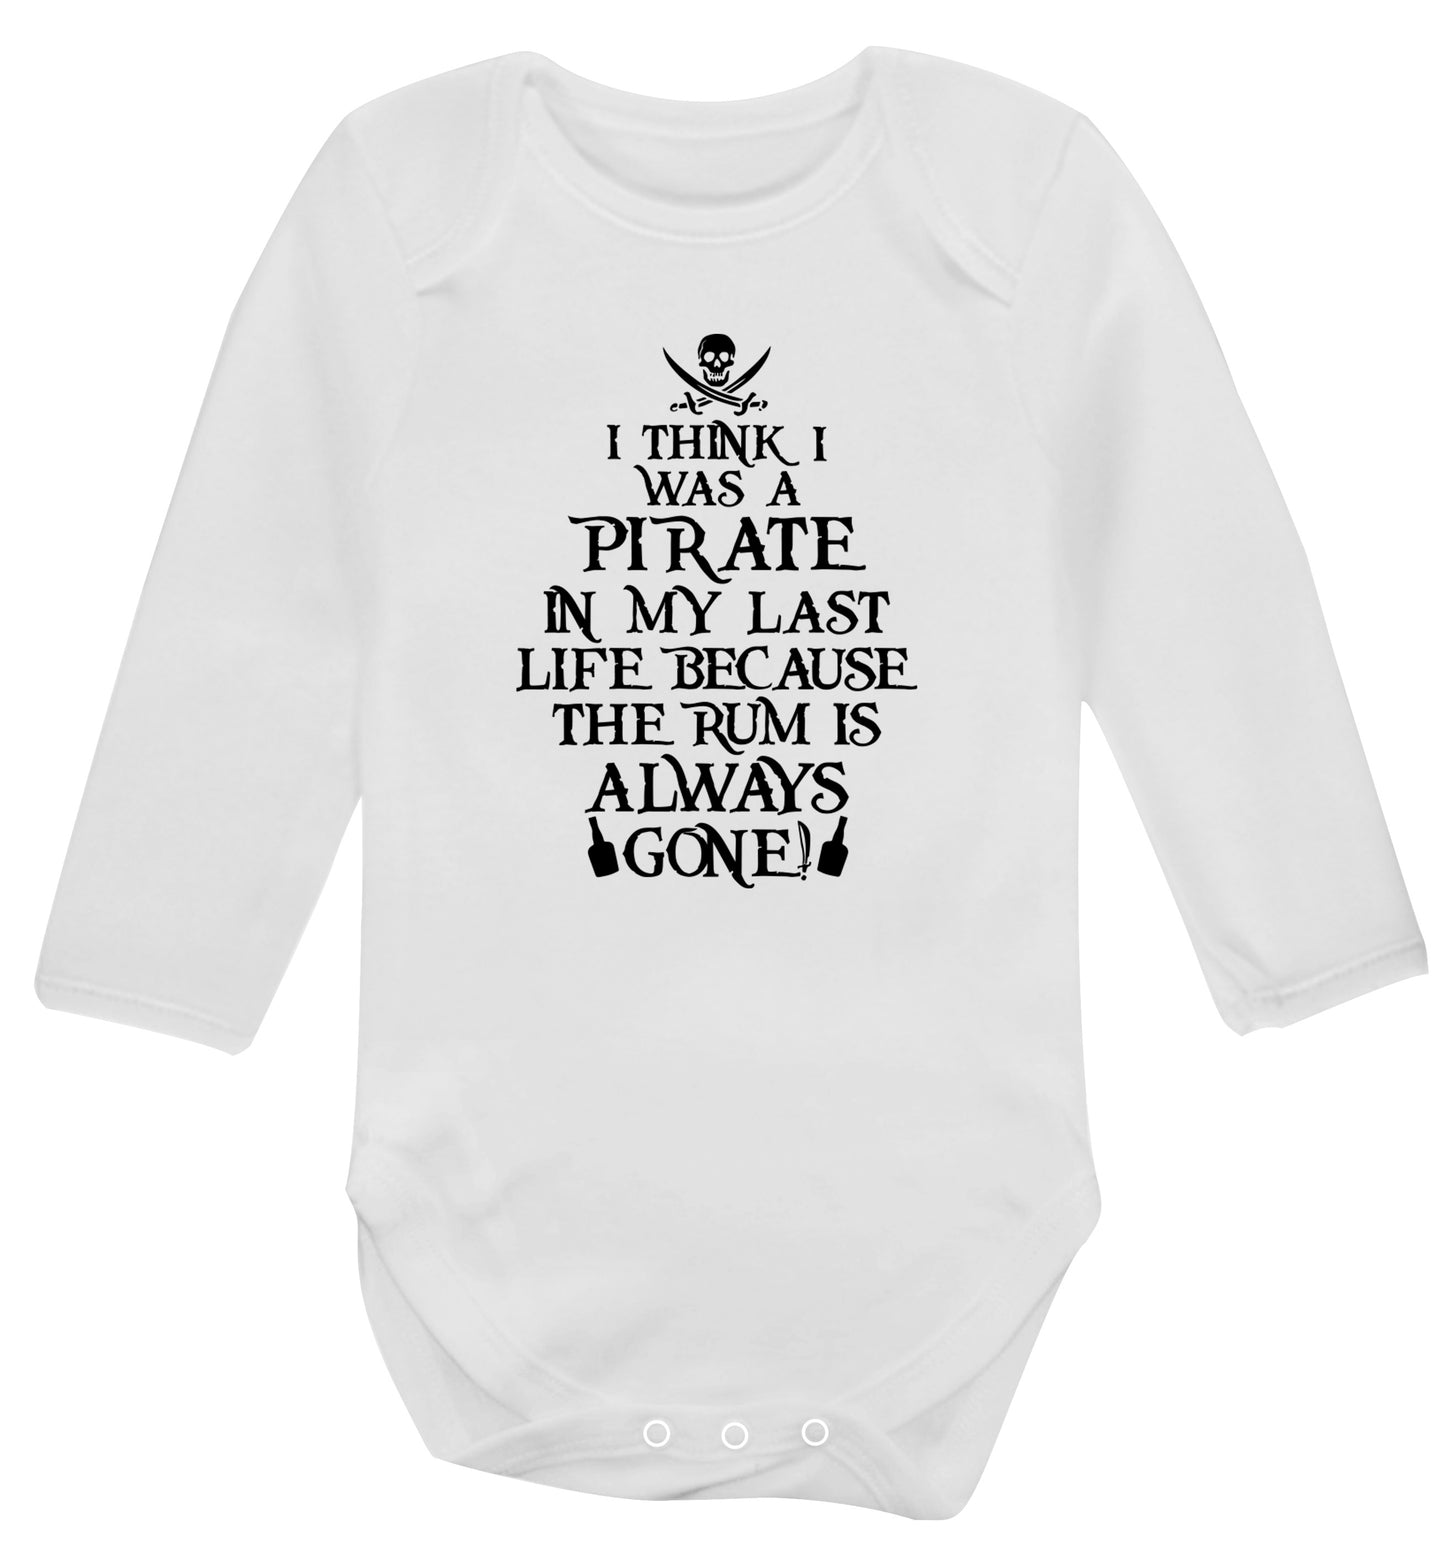 I think I was a pirate in my past life because the rum is always gone! Baby Vest long sleeved white 6-12 months